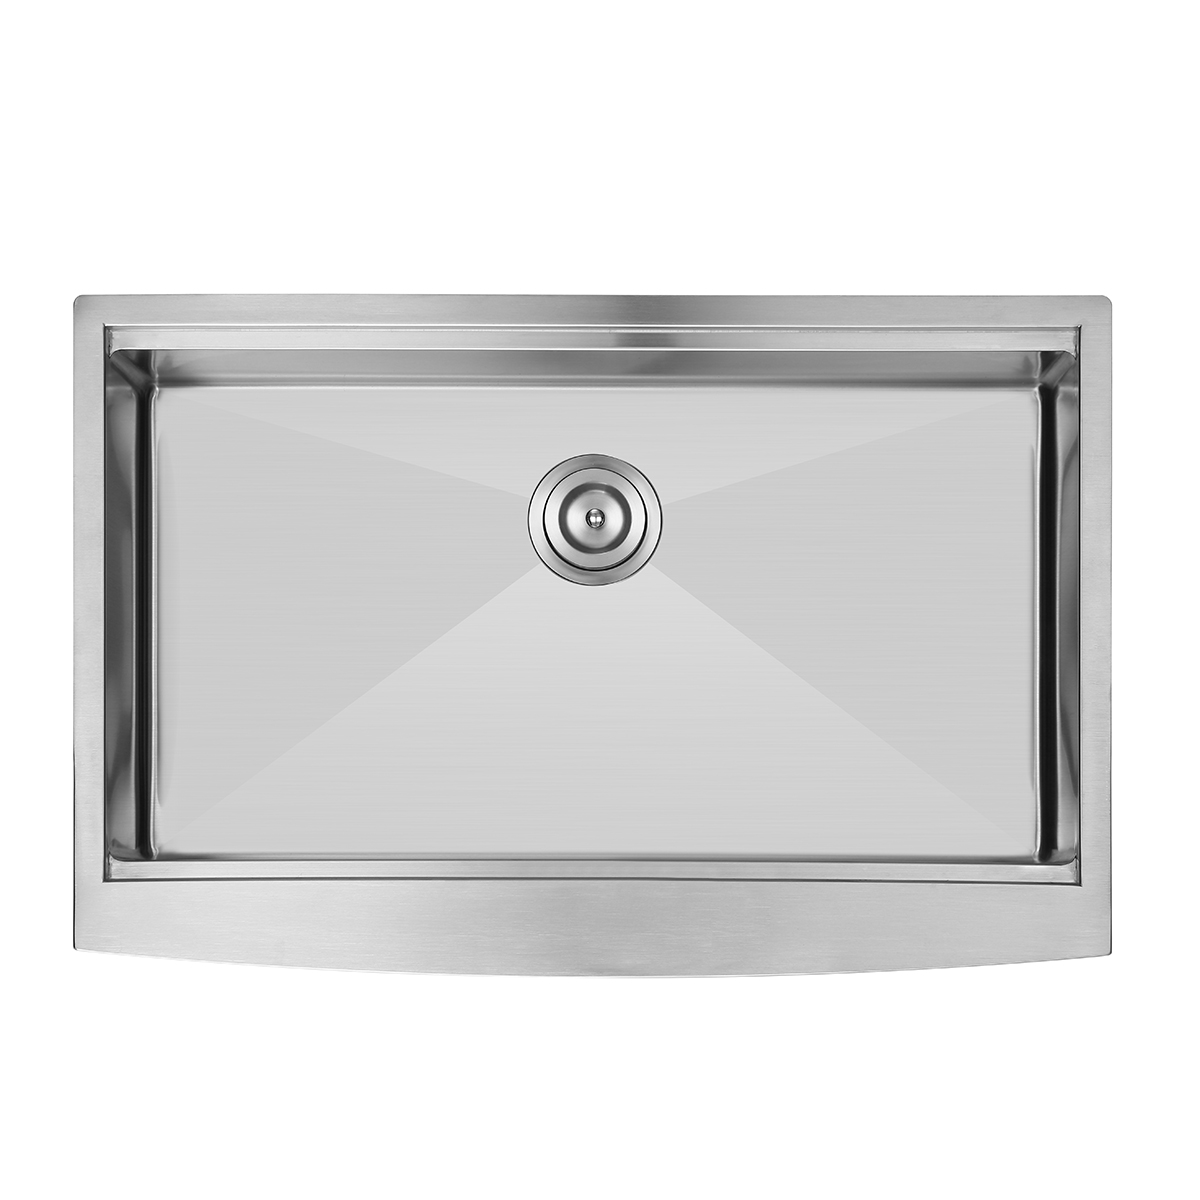 Farmhouse 304 Stainless Steel Handmade Apron Front Kitchen Sink with Ledge